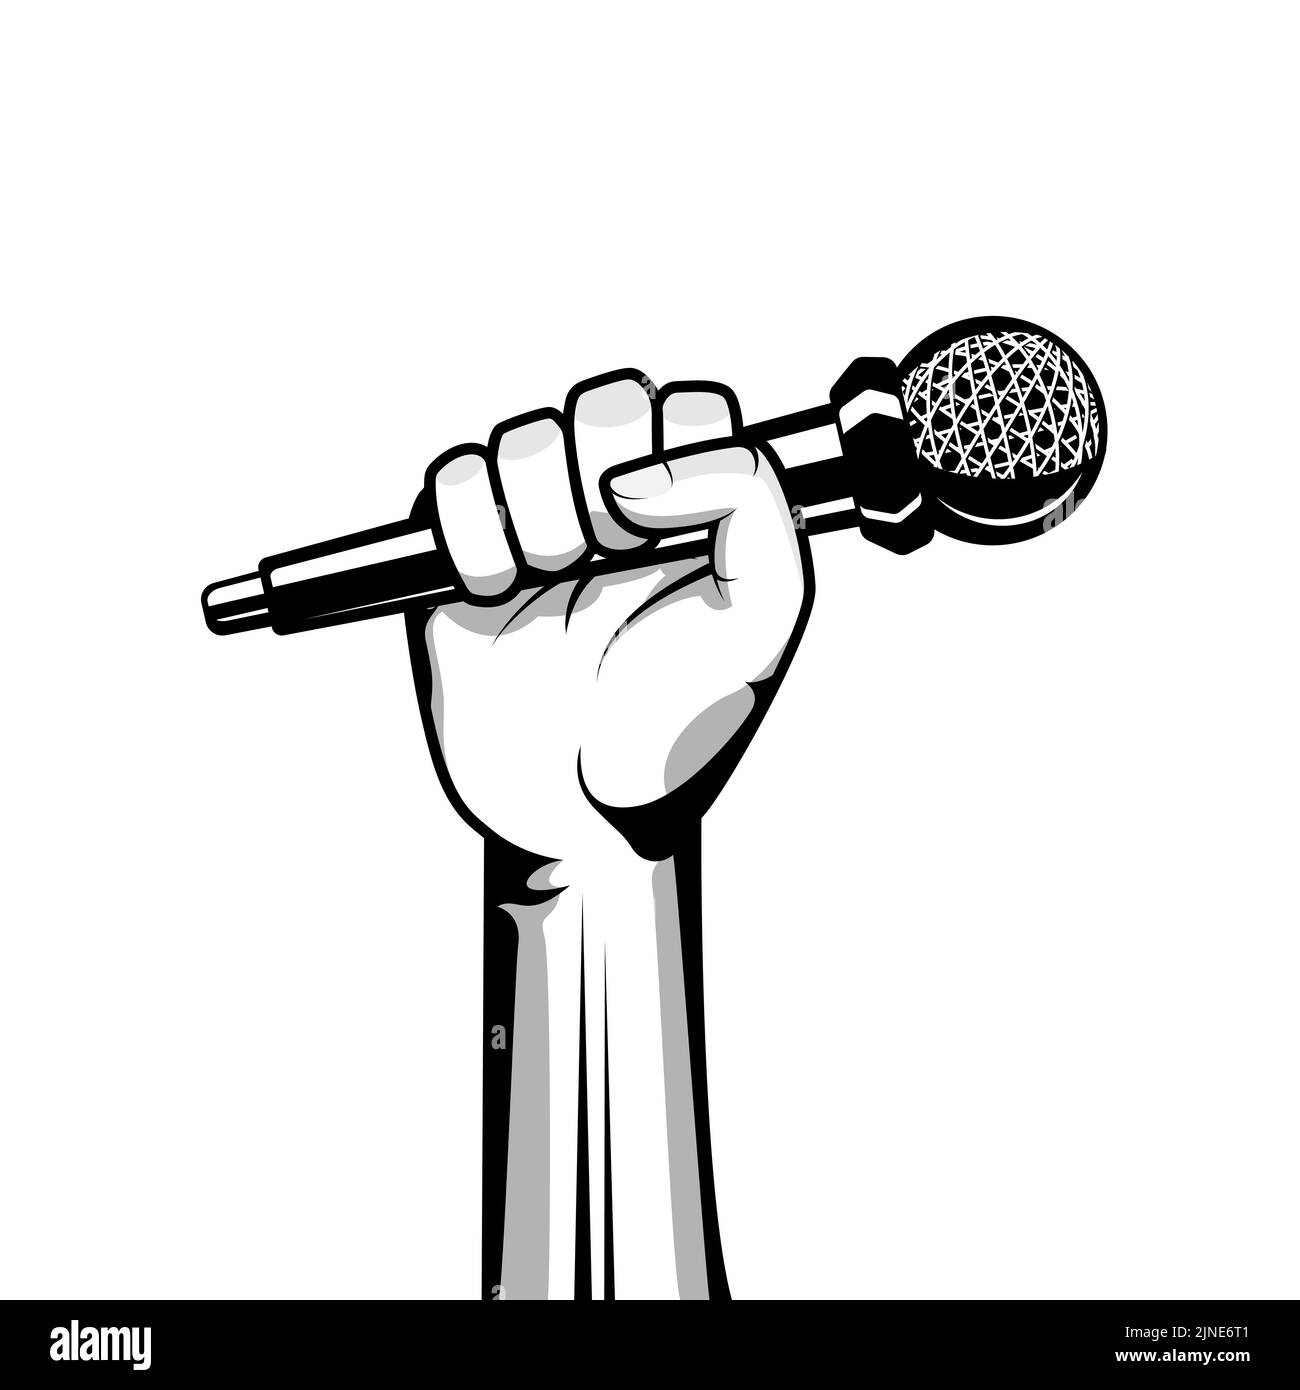 Hand holding microphone vector illustration. Hand and mic illustration. Stock Vector